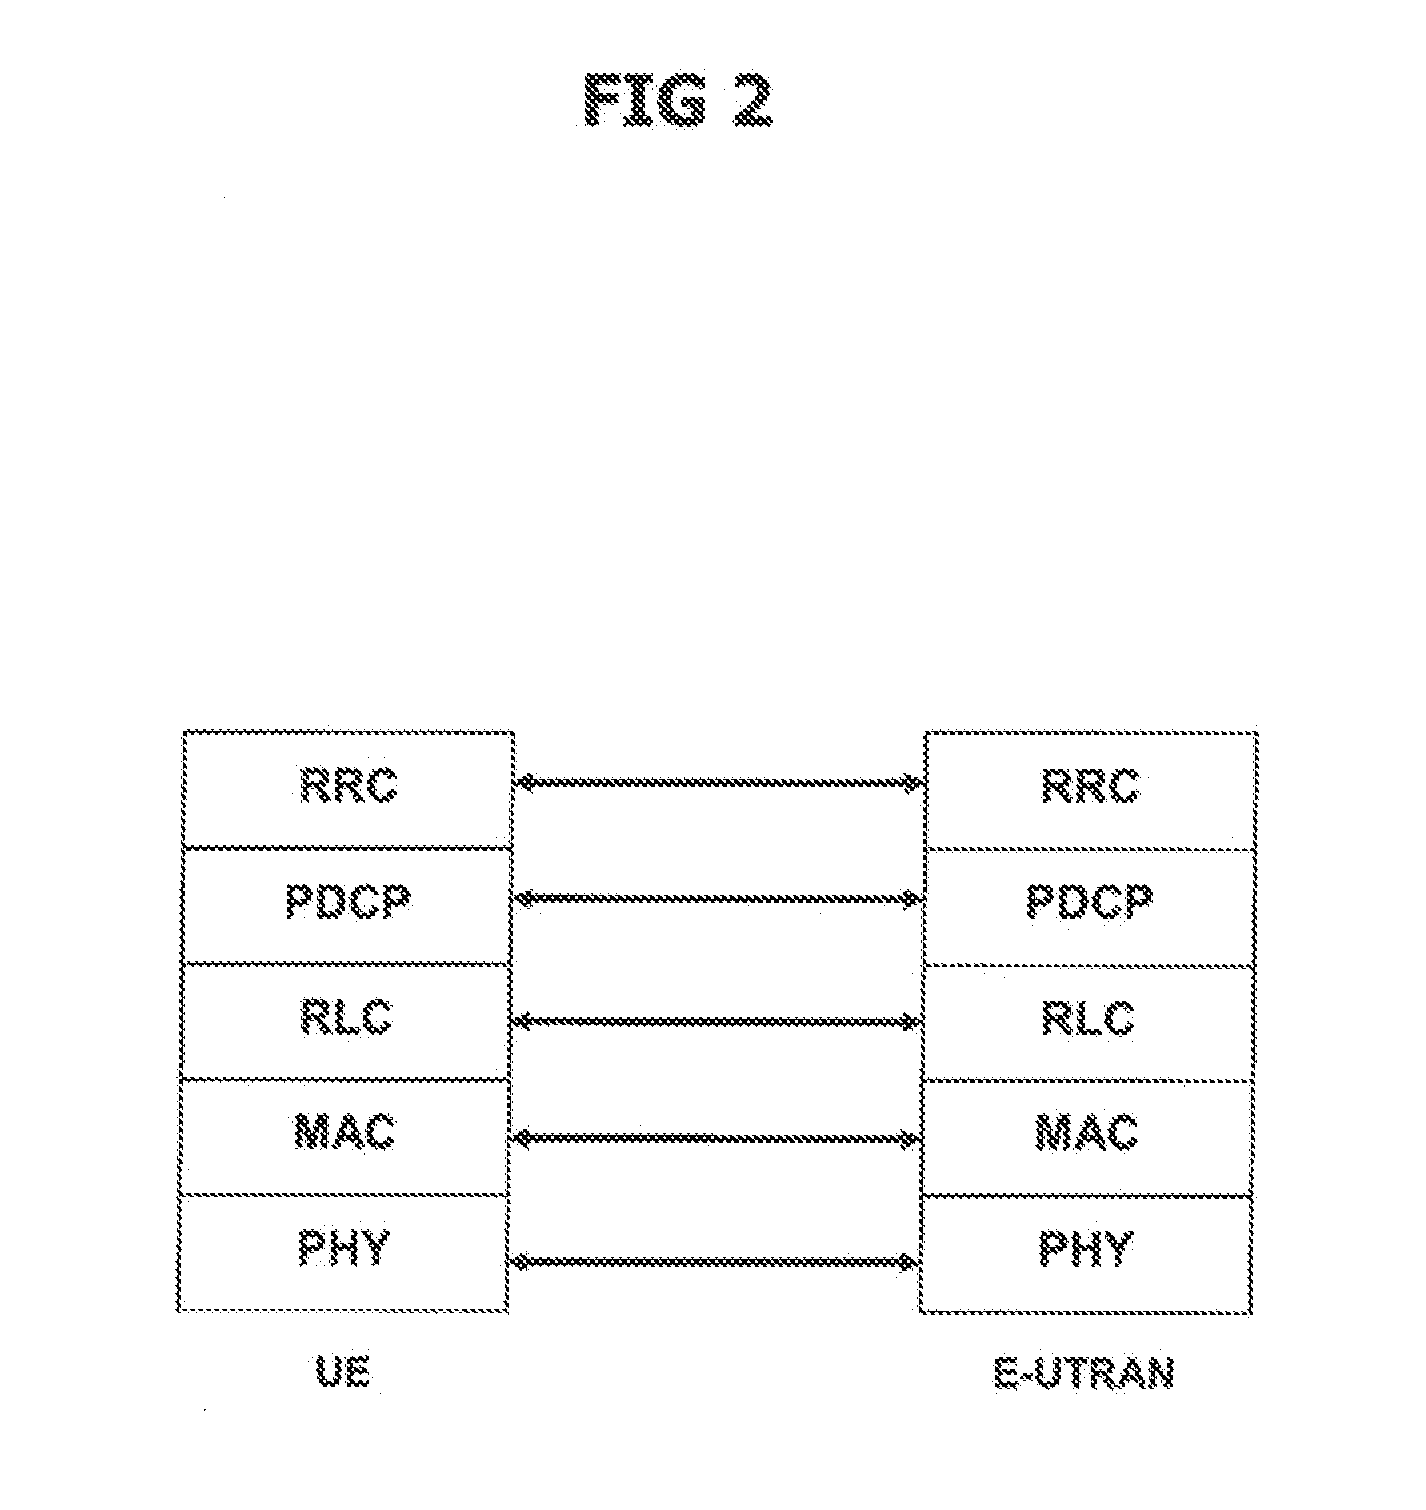 Method of performing a minimization of drive test (MDT) for specific area in wireless communication system